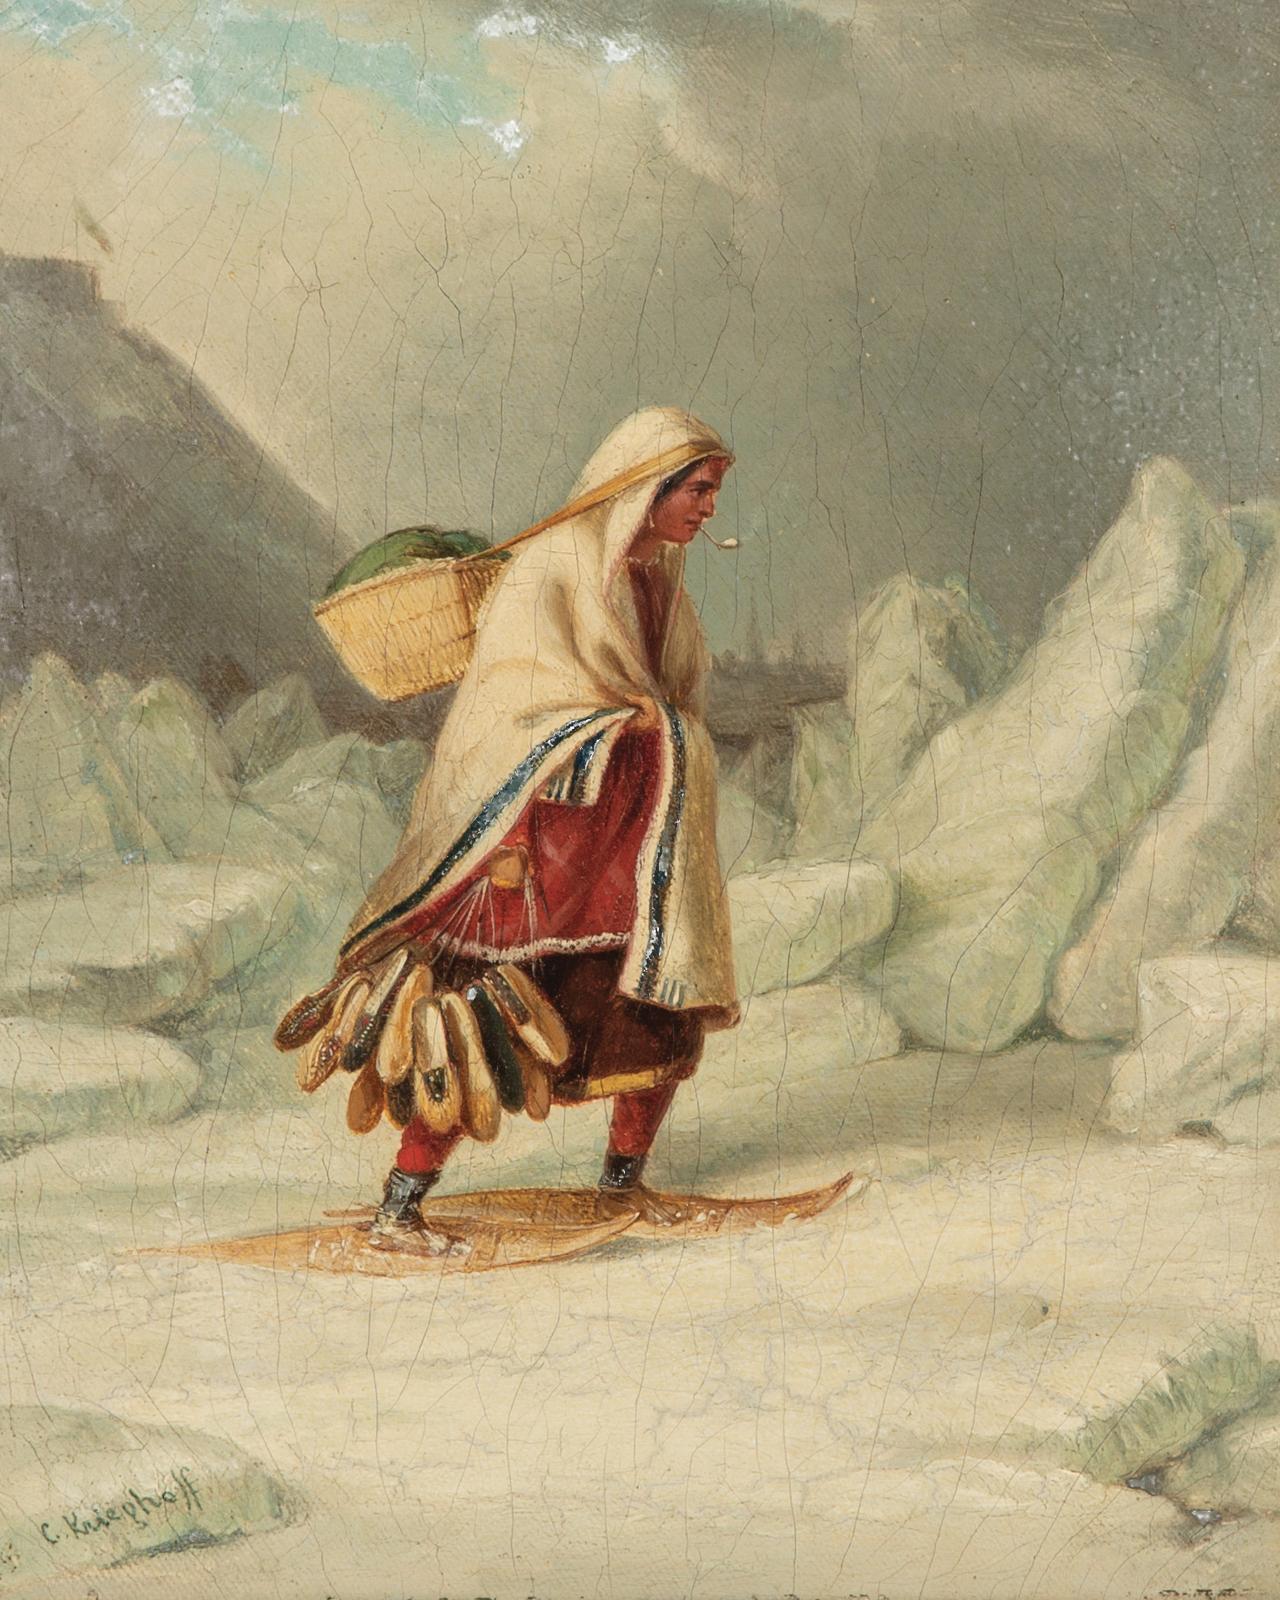 Cornelius David Krieghoff (1815-1872) - Indian Moccasin Seller With Pipe